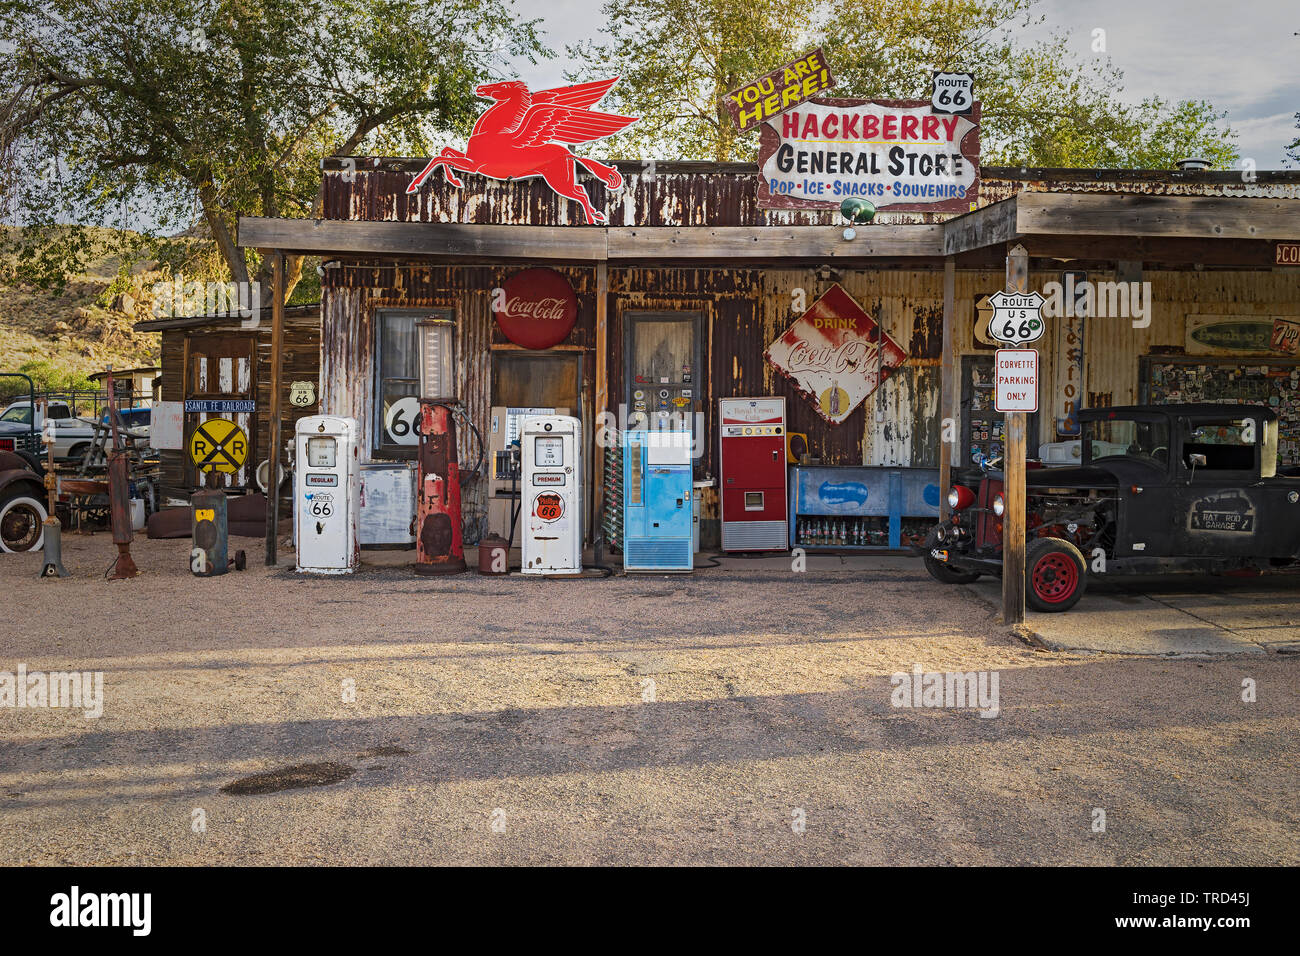 HACKBERRY GENERAL STORE ROUTE 66 Stock Photo